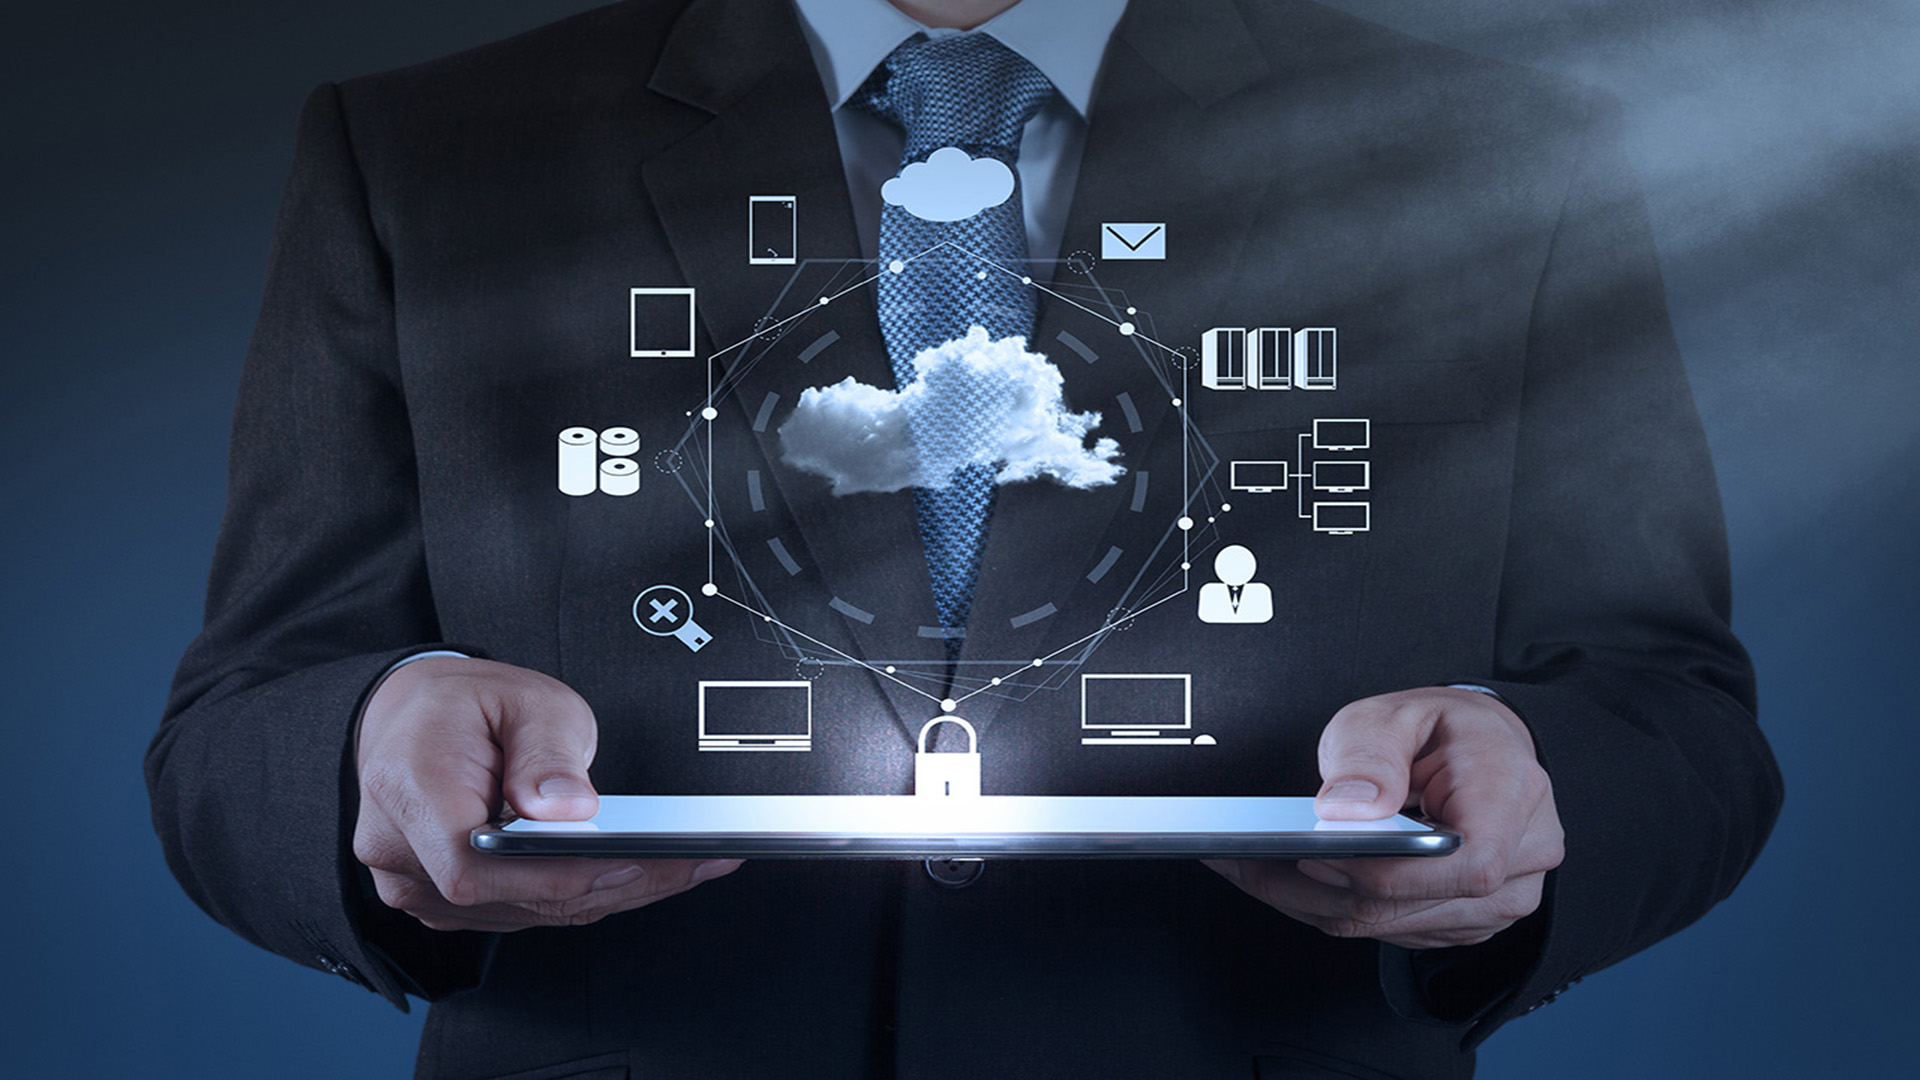 image of man holding a tablet with cloud above it giving the appearance of a networked infrastructure